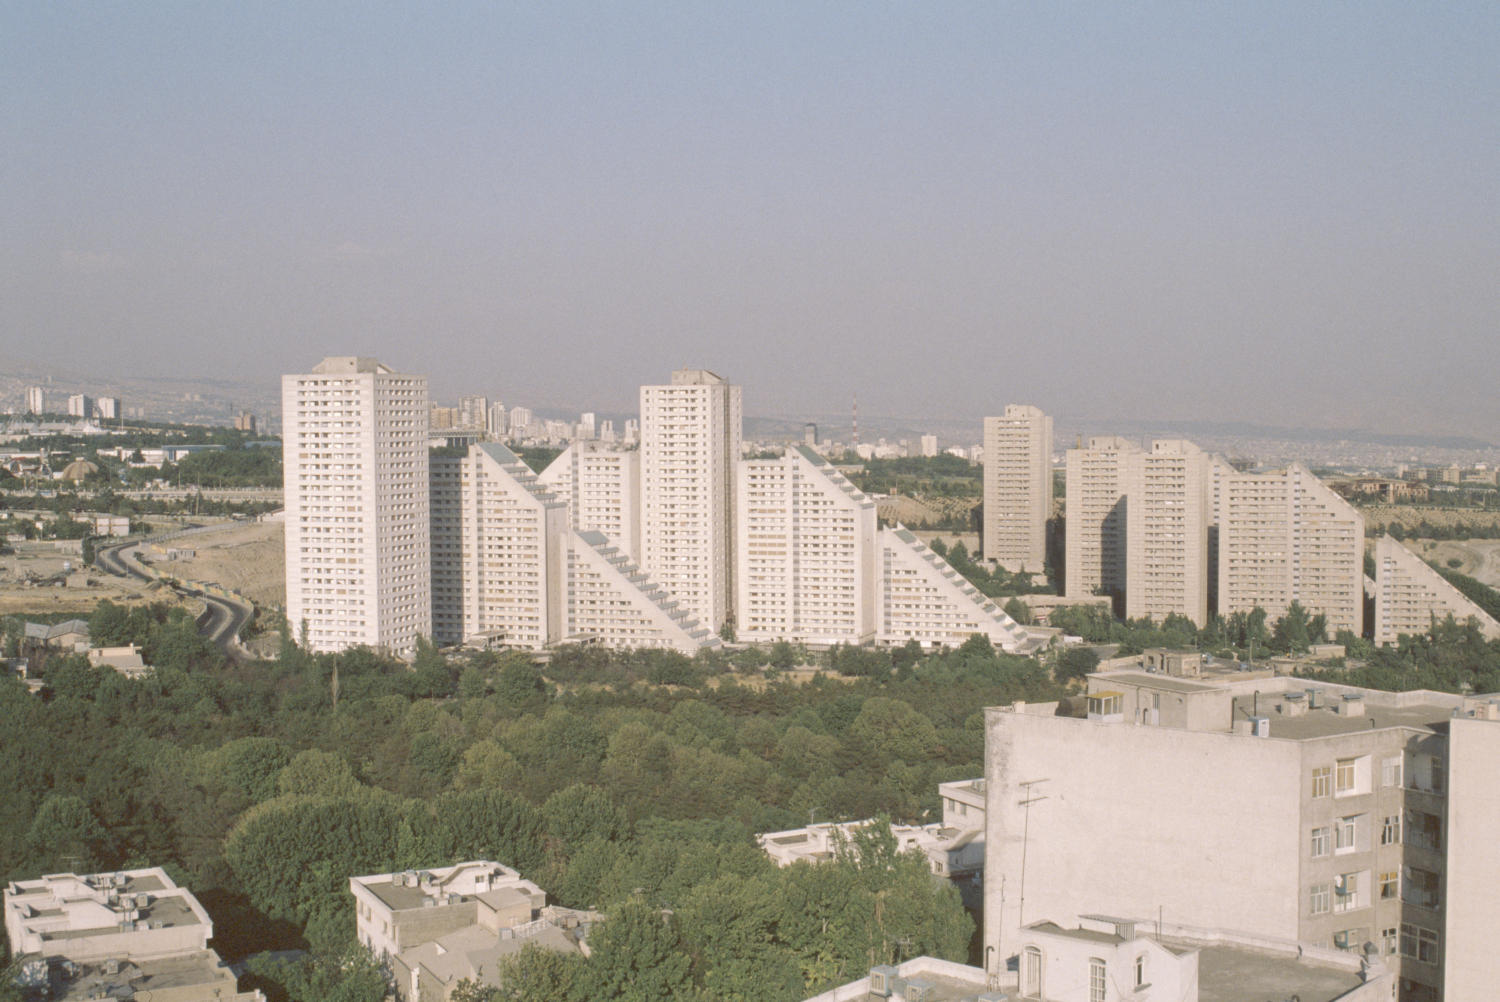 View of complex among cityscape.